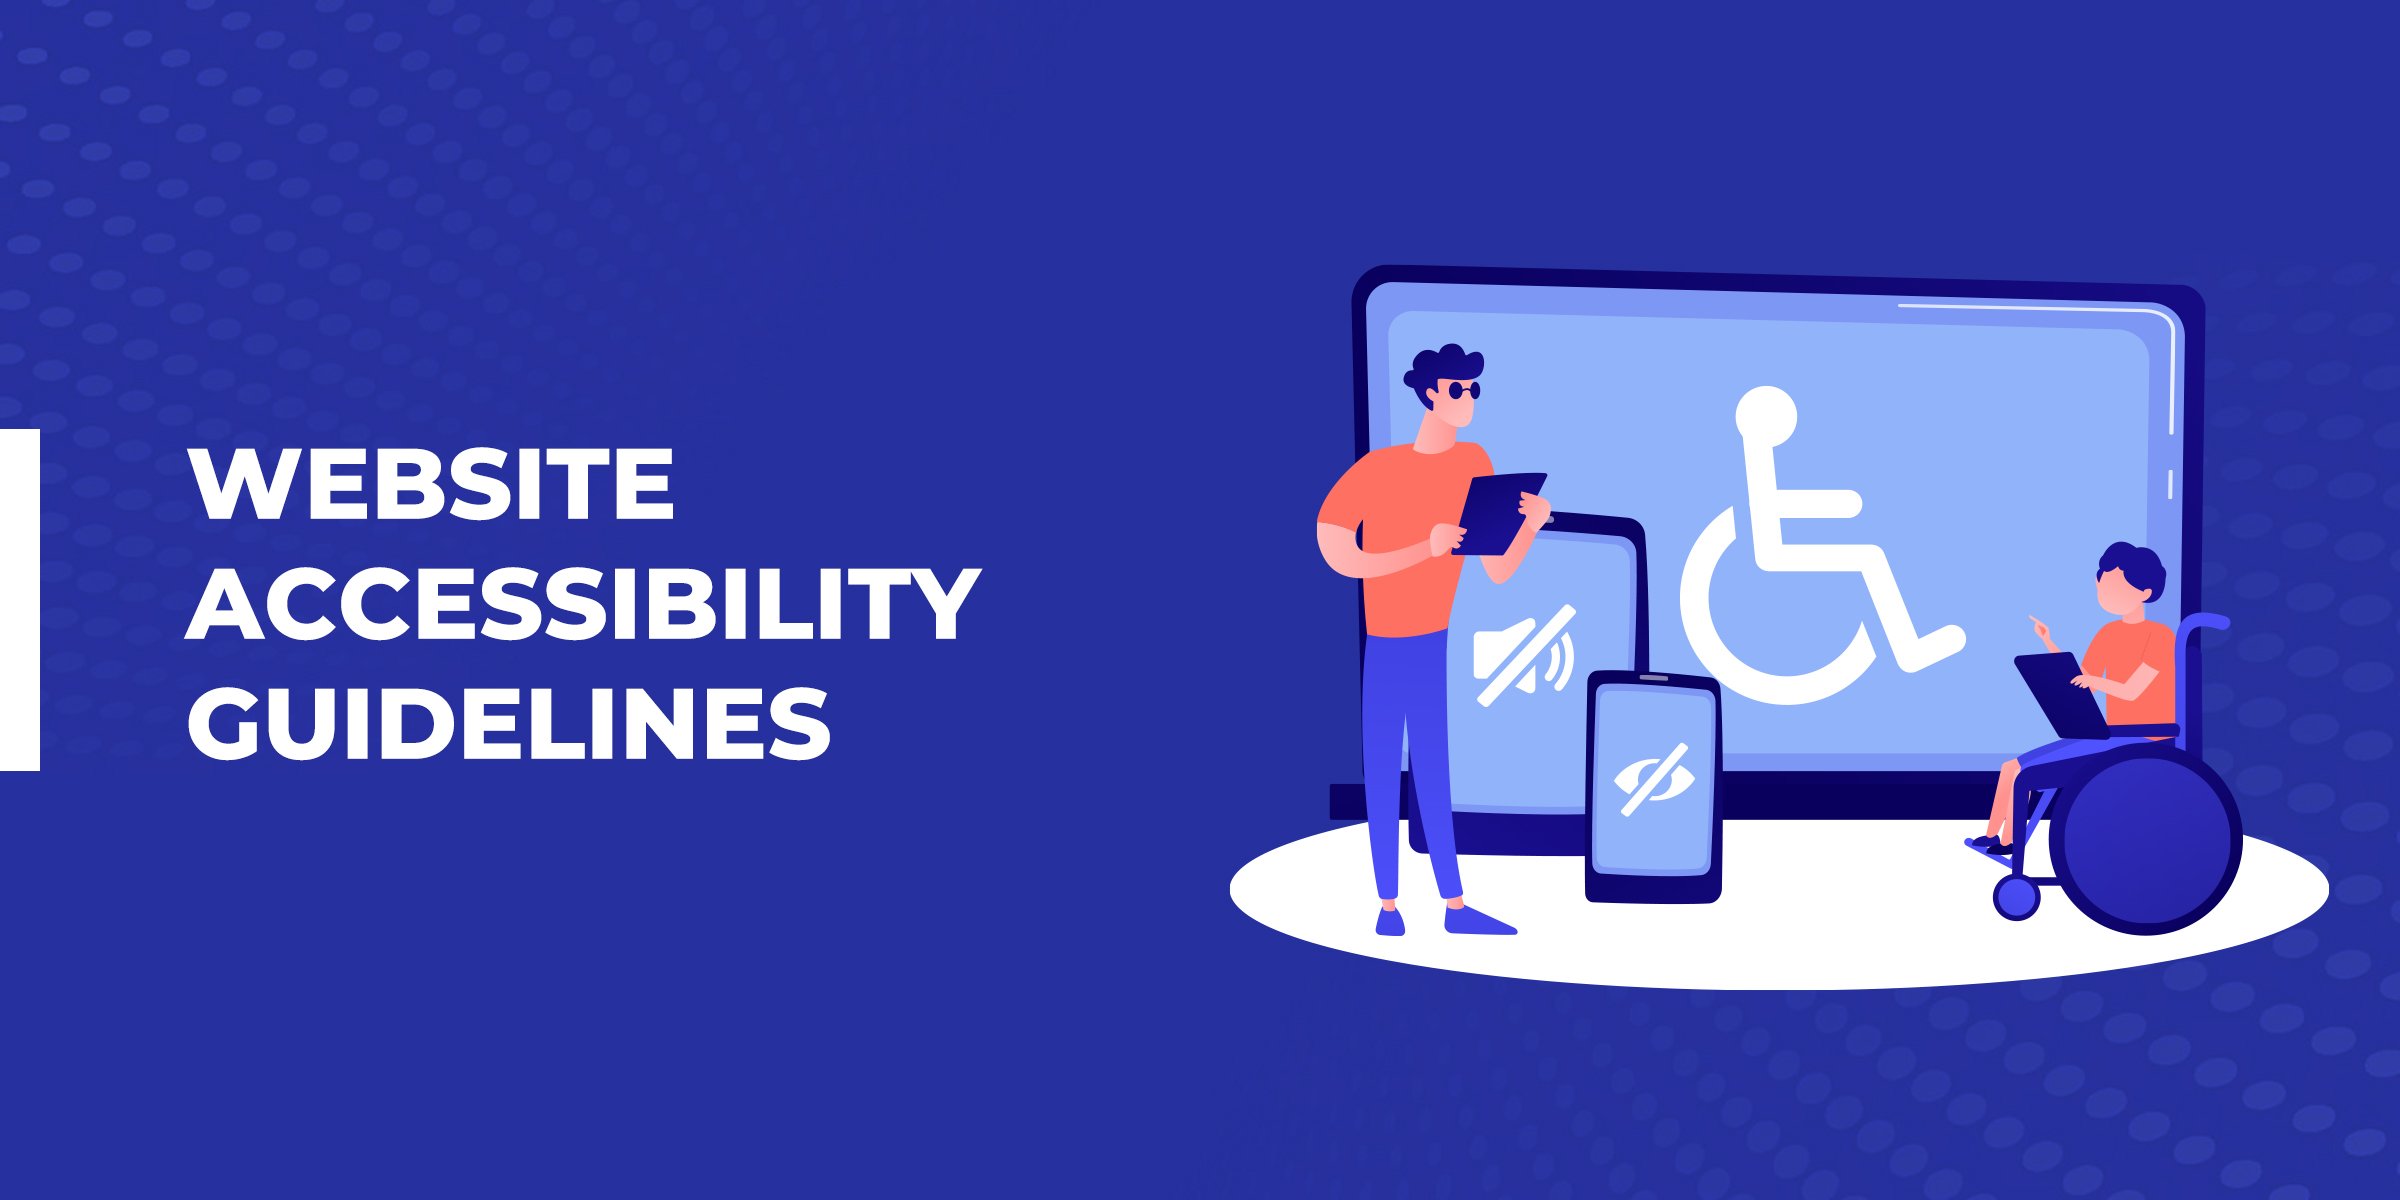 Website Accessibility Guidelines